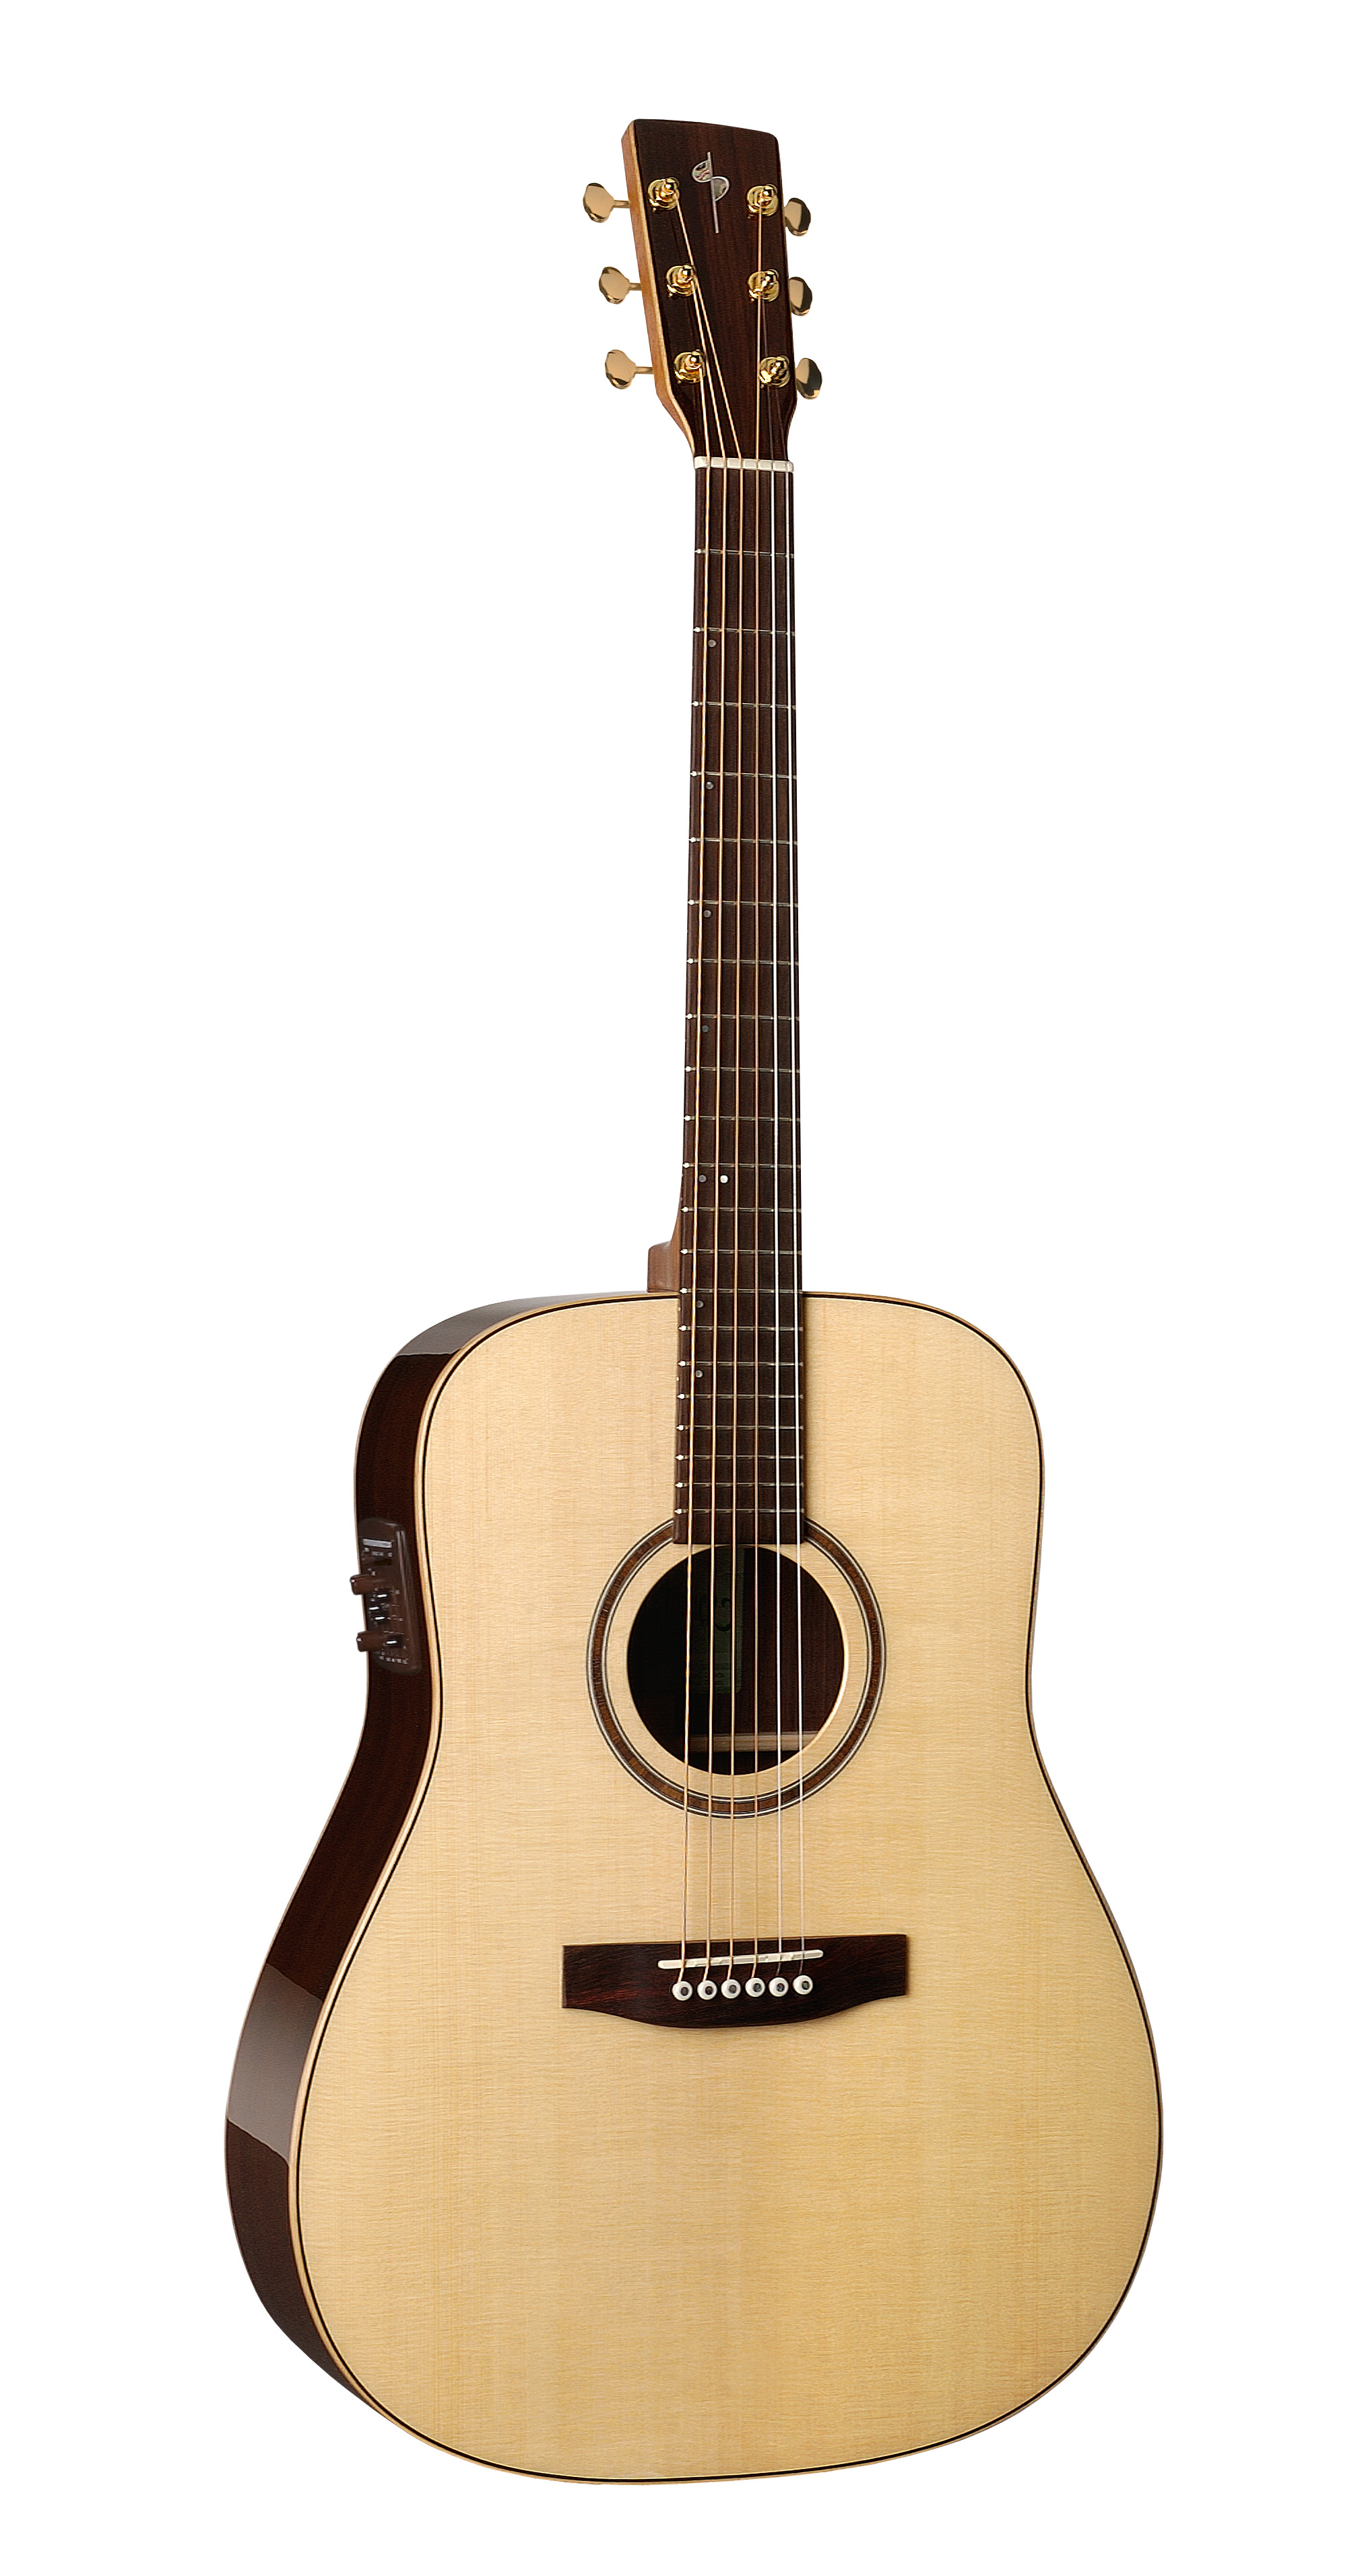 Simon & Patrick 40476 Showcase Rosewood Concert Hall Acoustic Electric Guitar w/ B-Band A6T